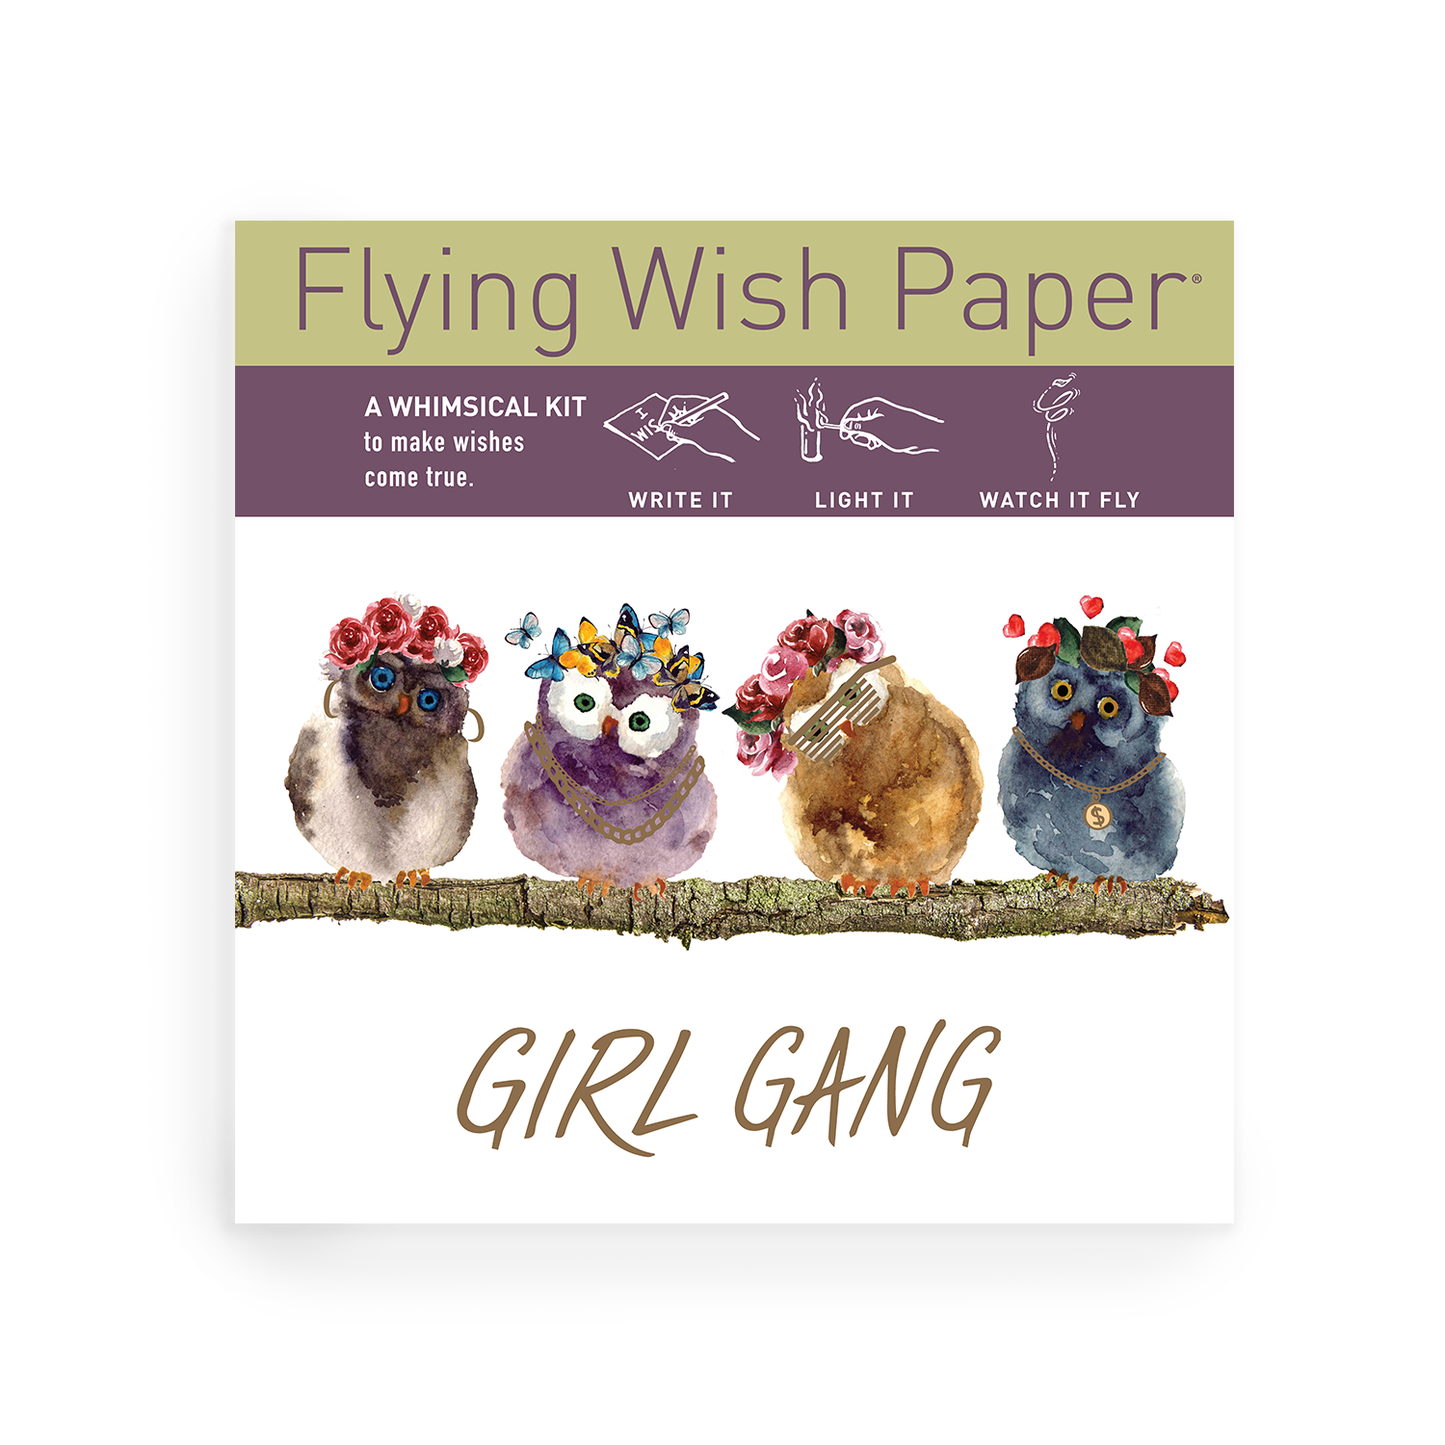 GIRL GANG  / Mini kit with 15 Wishes + accessories